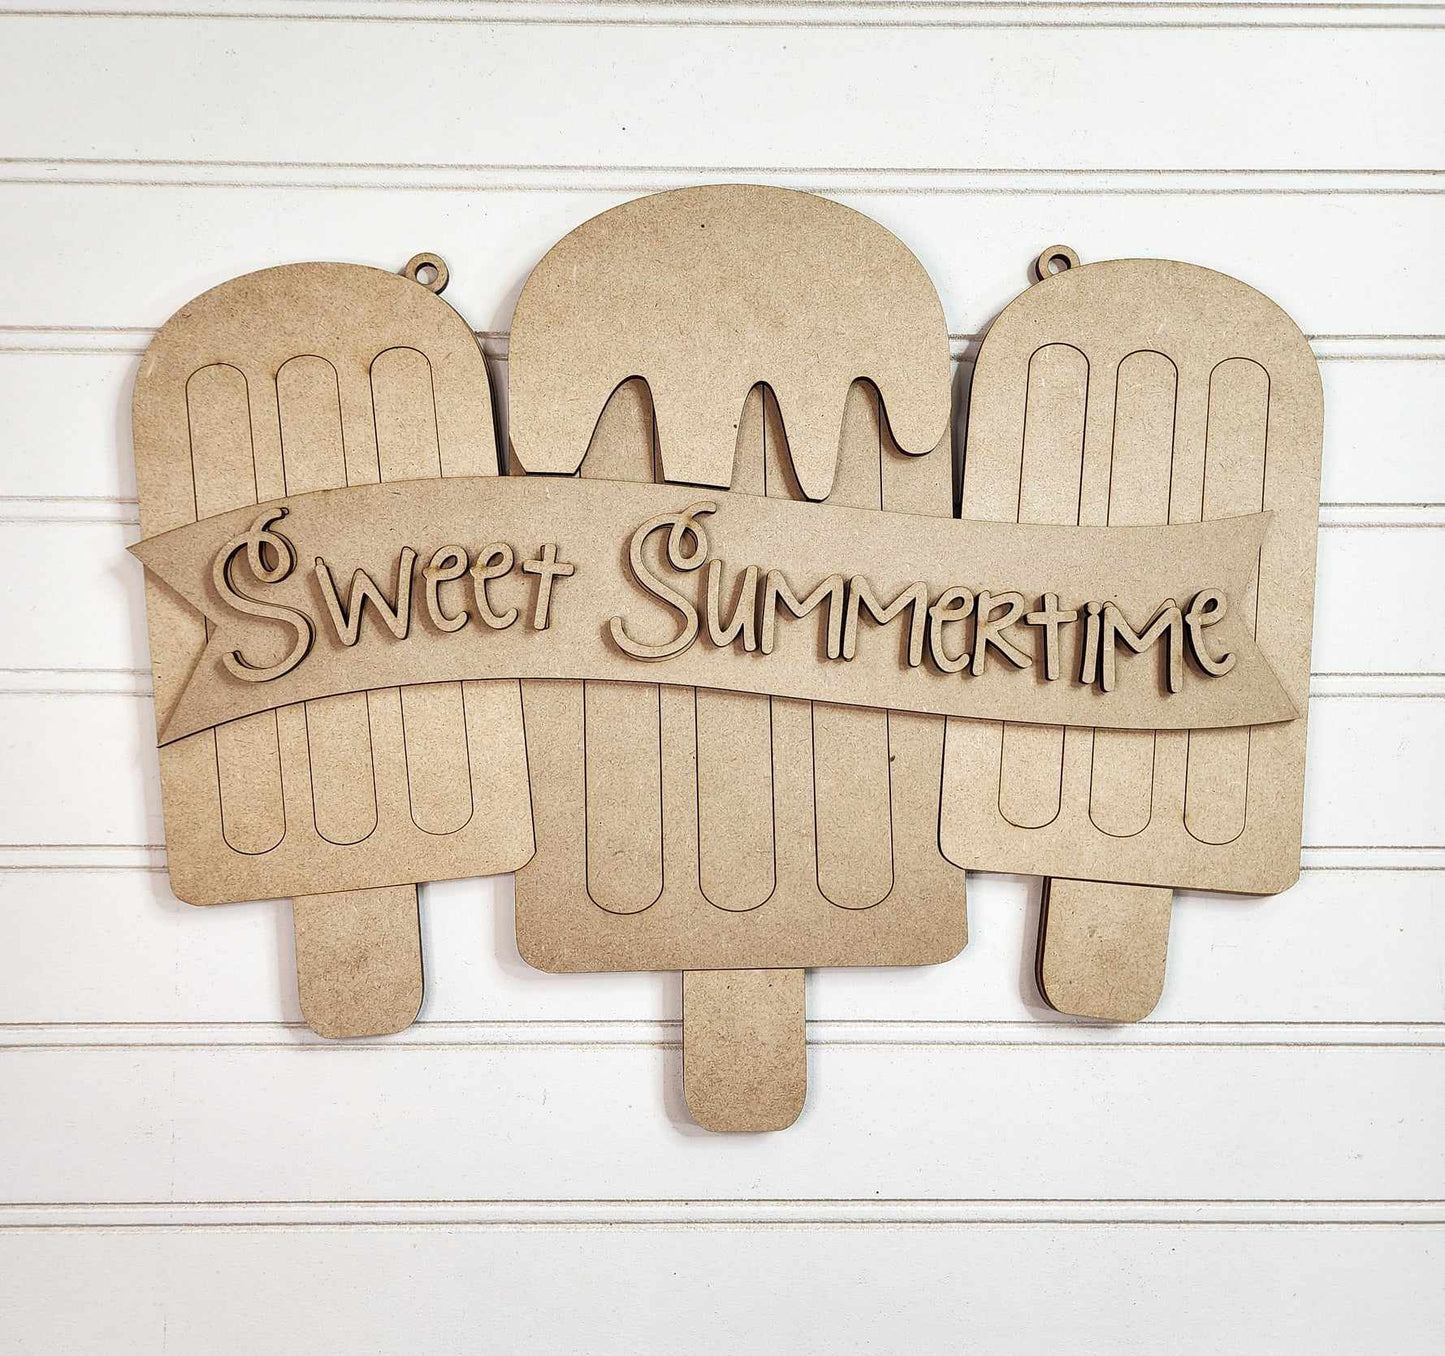 Sweet Summertime Door Sign wood cutouts ready for you to paint